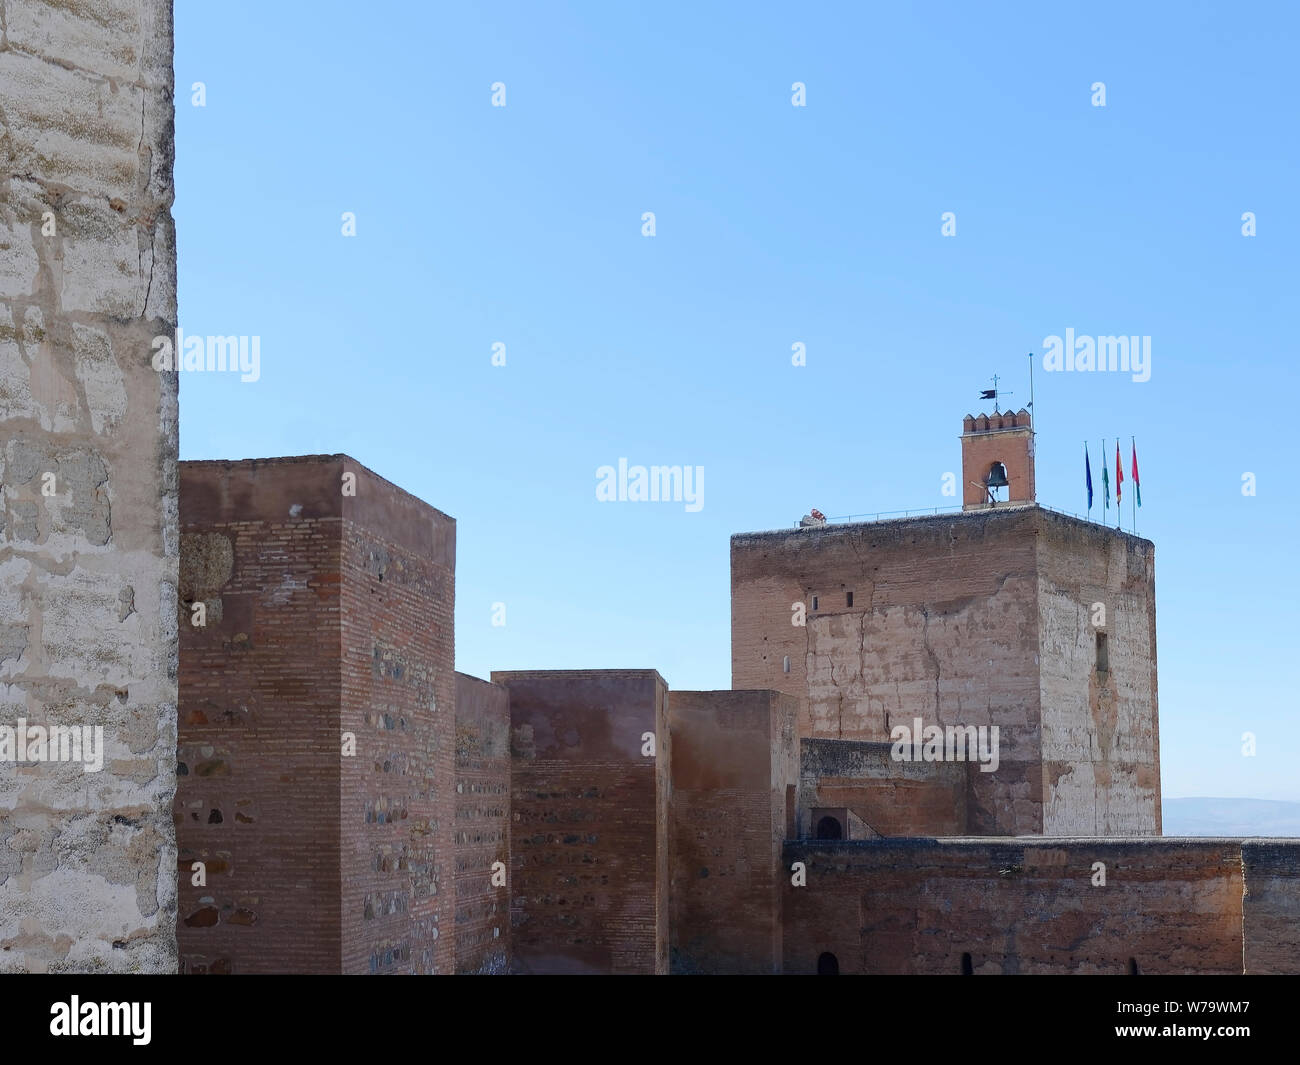 The massive walls of the Alhambra fortress, remember to visitors that, the southern area of Spain, some centuries ago, was ruler under Islamic rulers. Stock Photo